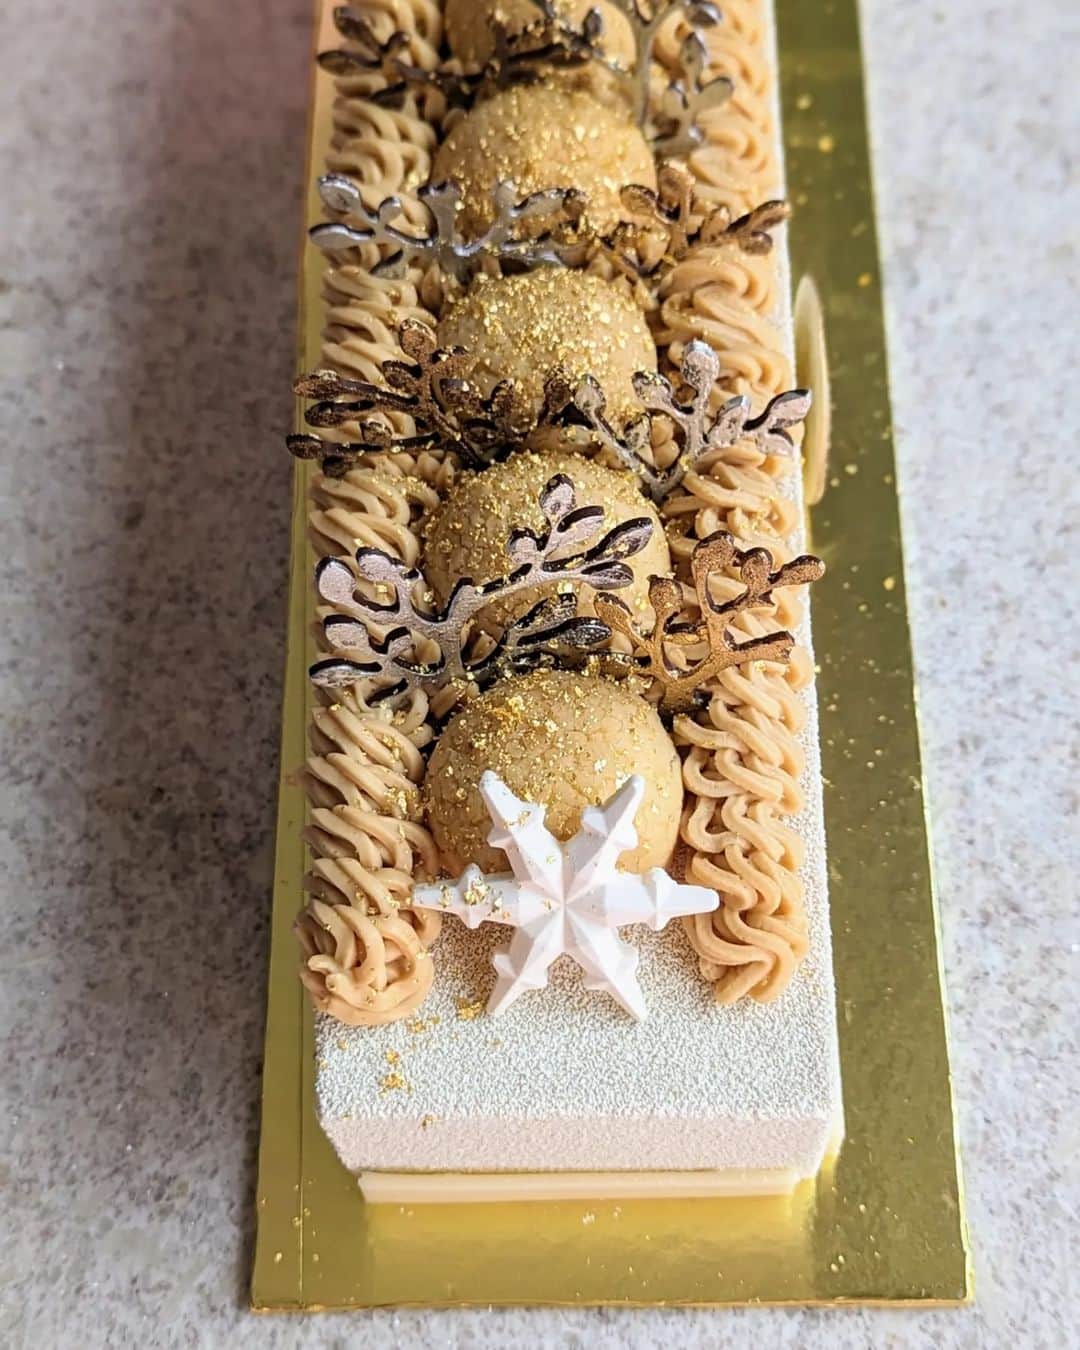 Li Tian の雑貨屋のインスタグラム：「Stoked to receive this Snowy Splendour Log Cake ($99 nett for 1kg) that not only looks stunning but offers loads of caramelized milky notes with the use of Dulcey Chocolate.   There's a crunchy white choc macademia nut layer on the base too!   20% off orders before 10 Dec for citi, dbs/posb, HSBC, maybank, ocbc, UOB cardholders   #goodwood #sghotel #christmas  #cakes #seasonal #chocolate #sgdesserts #sgcakes」